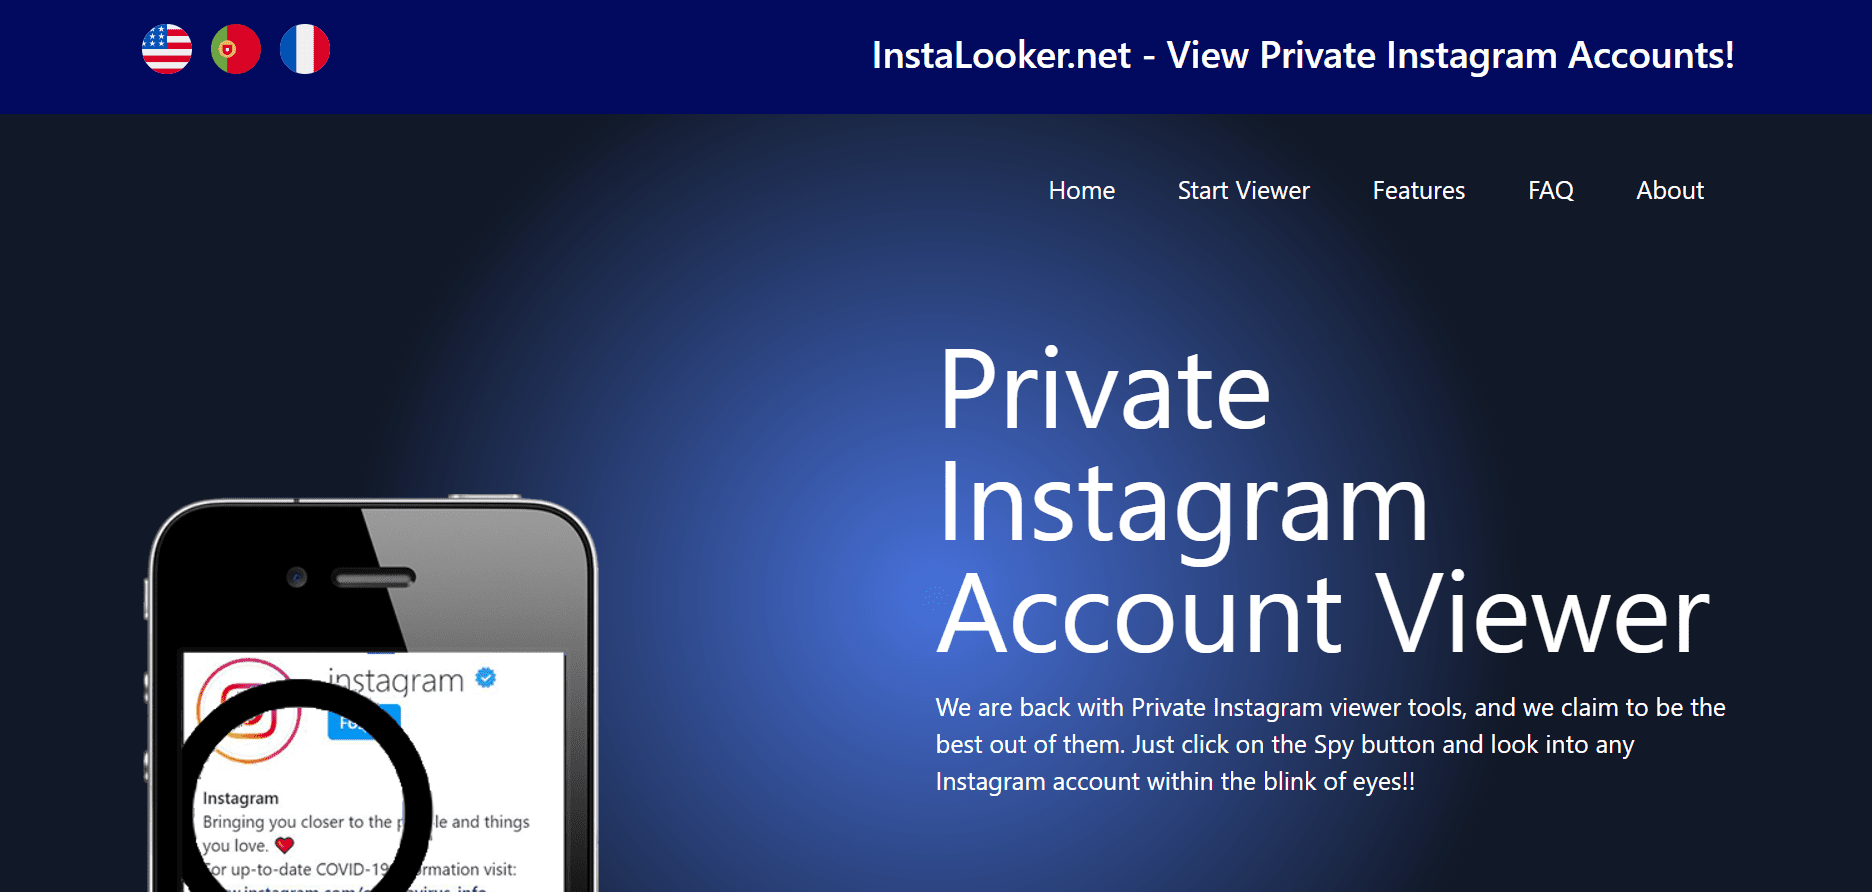 How To View Private Instagram Profiles : InstaLooker